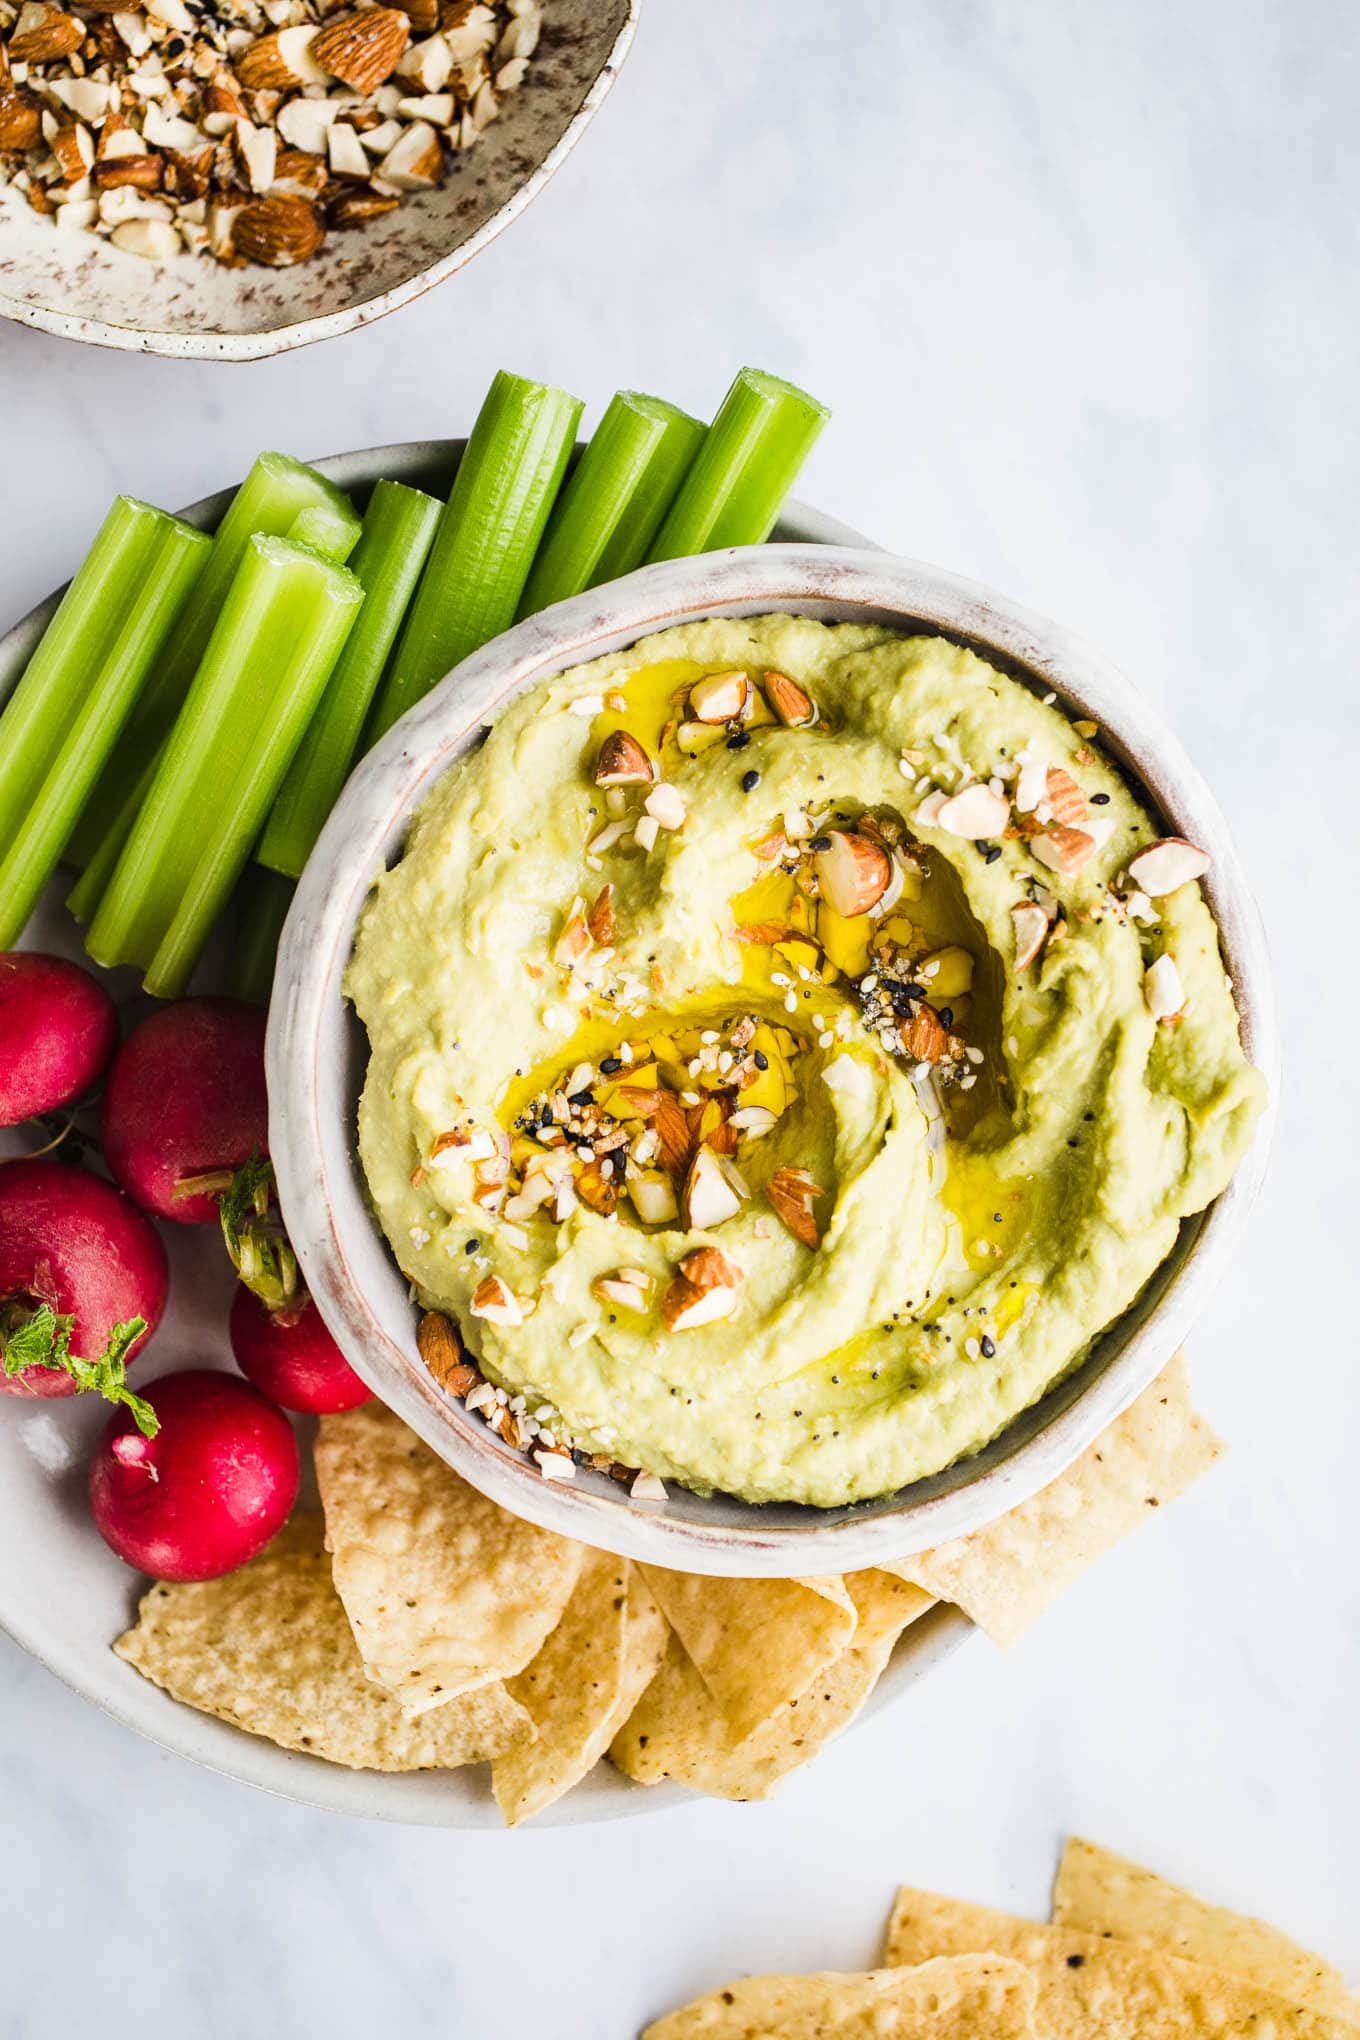 Green dip in a white bowl served with celery, radishes, and tortilla chips.